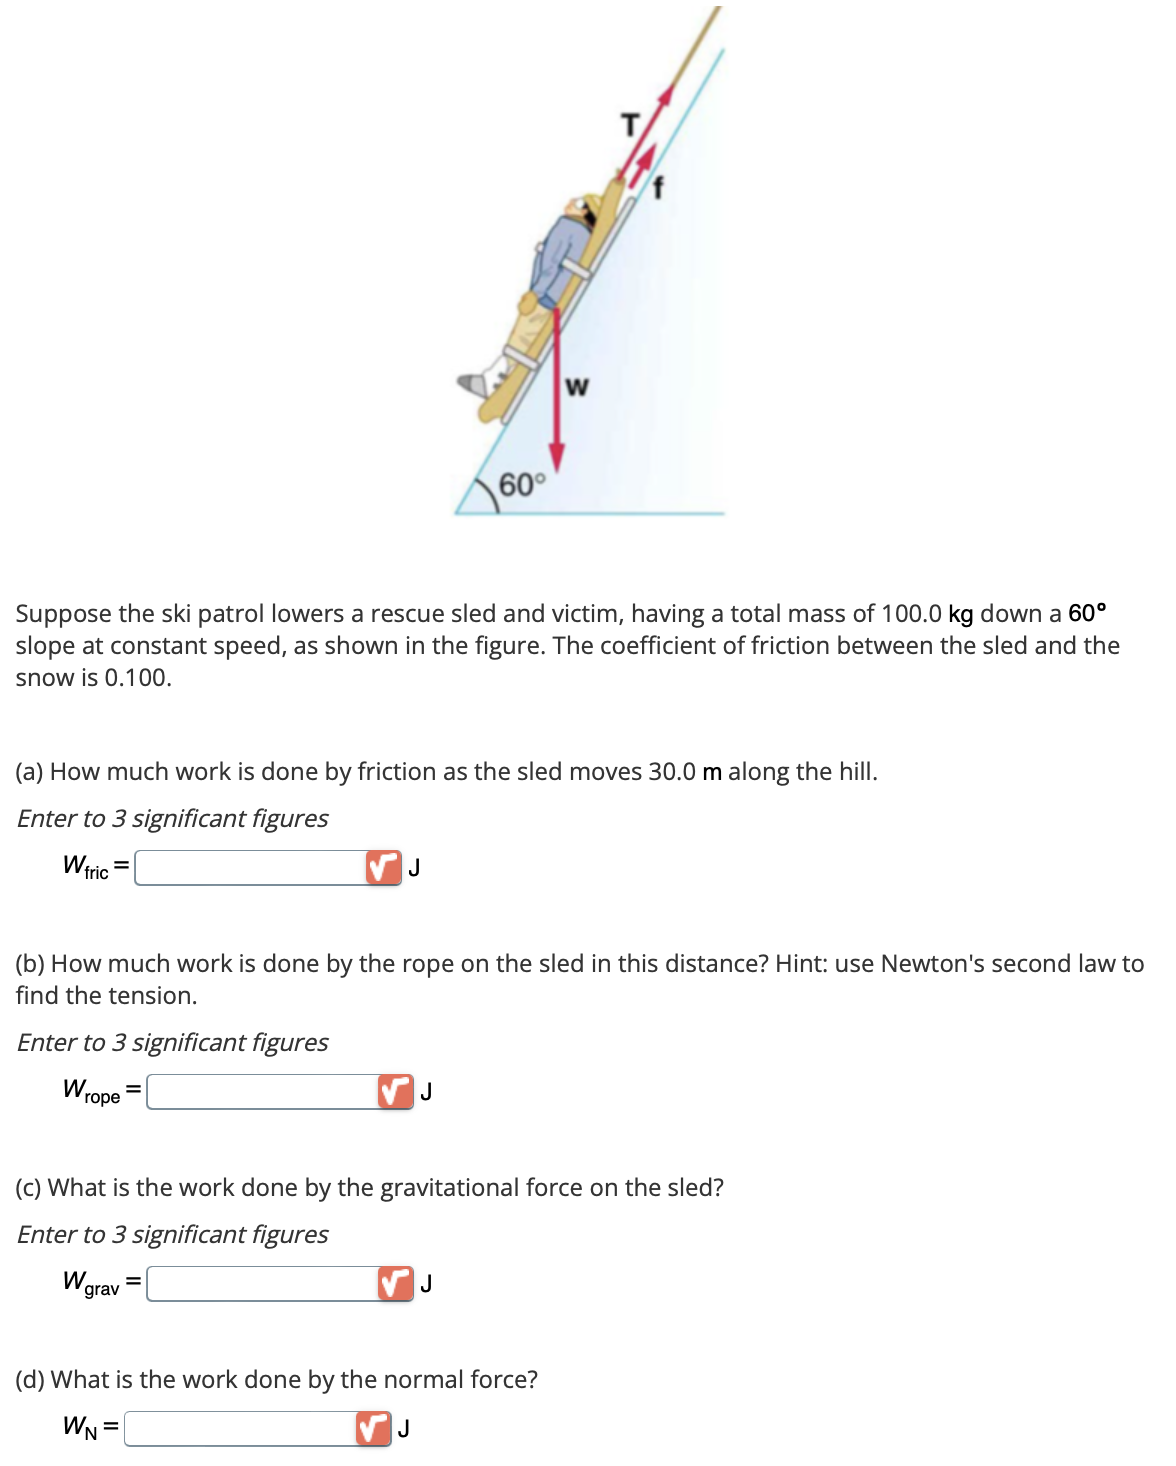 60°
Suppose the ski patrol lowers a rescue sled and victim, having a total mass of 100.0 kg down a 60°
slope at constant speed, as shown in the figure. The coefficient of friction between the sled and the
snow is 0.100.
J
(a) How much work is done by friction as the sled moves 30.0 m along the hill.
Enter to 3 significant figures
Wfric
J
W
(b) How much work is done by the rope on the sled in this distance? Hint: use Newton's second law to
find the tension.
Enter to 3 significant figures
Wrope
T
J
(c) What is the work done by the gravitational force on the sled?
Enter to 3 significant figures
W grav
(d) What is the work done by the normal force?
WN =
J